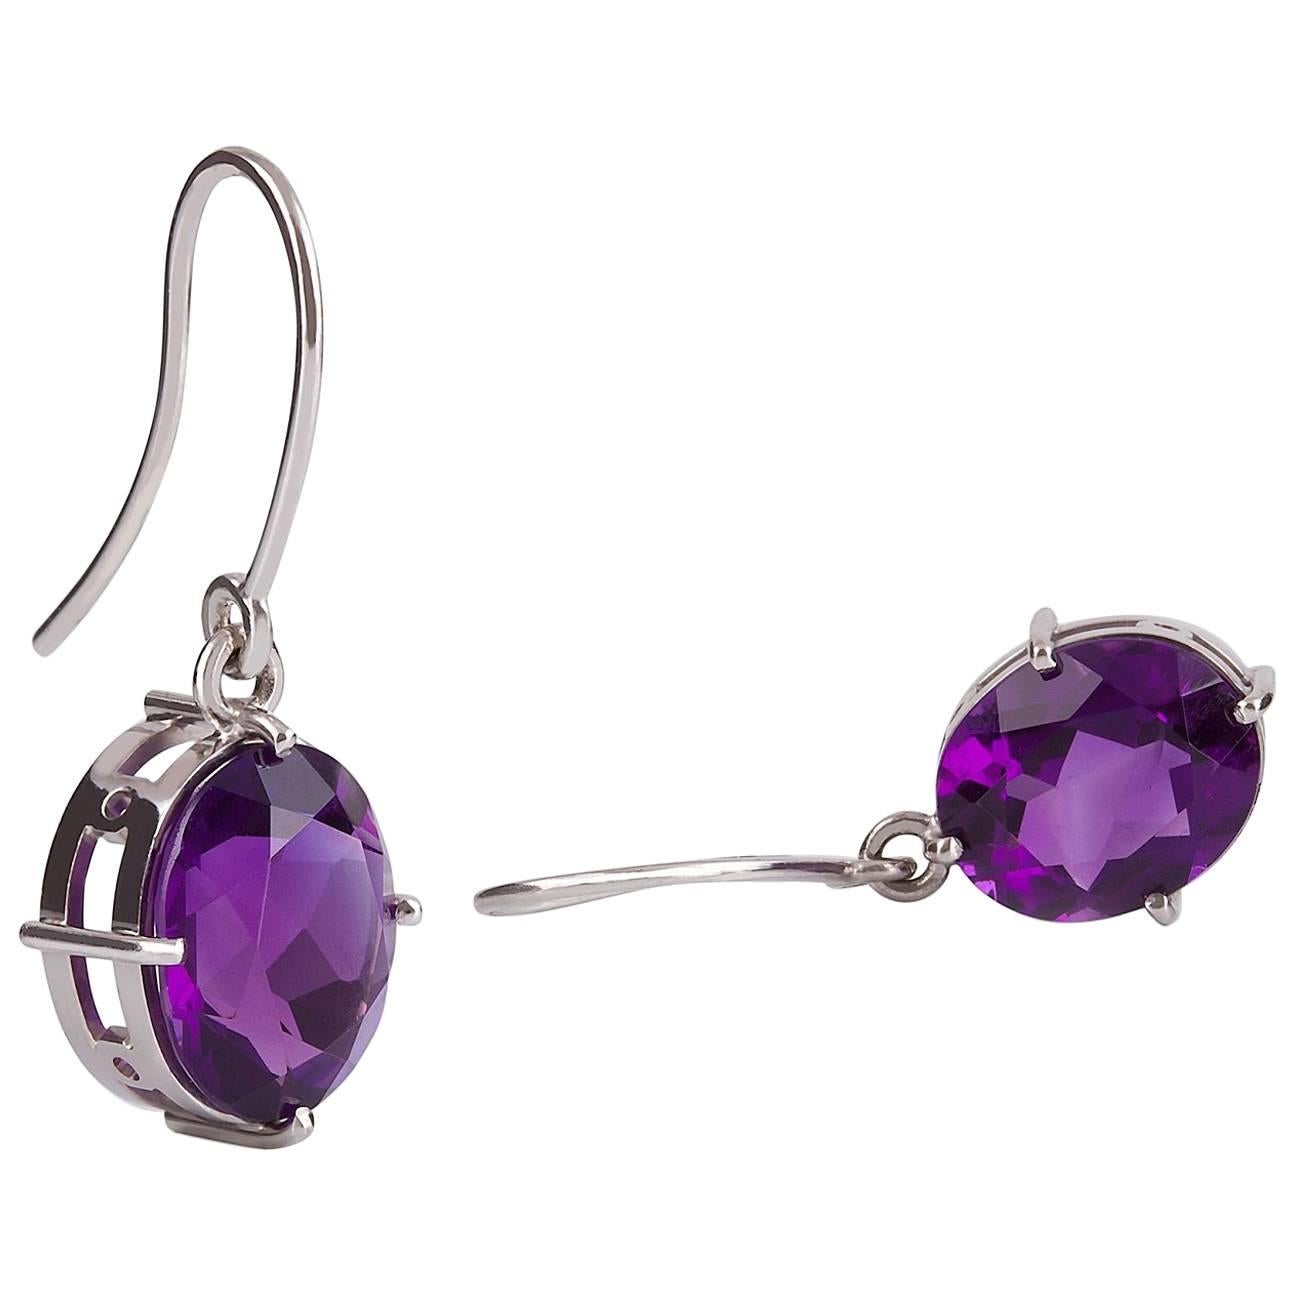 Viola Earrings

This beautiful pair of handmade earrings in 18ct white gold feature two striking amethysts set in four prong settings and suspended from elegant shepherd hooks

2 x Oval faceted amethysts: Deep purple colour, measuring 12 x 9.6 x 6mm